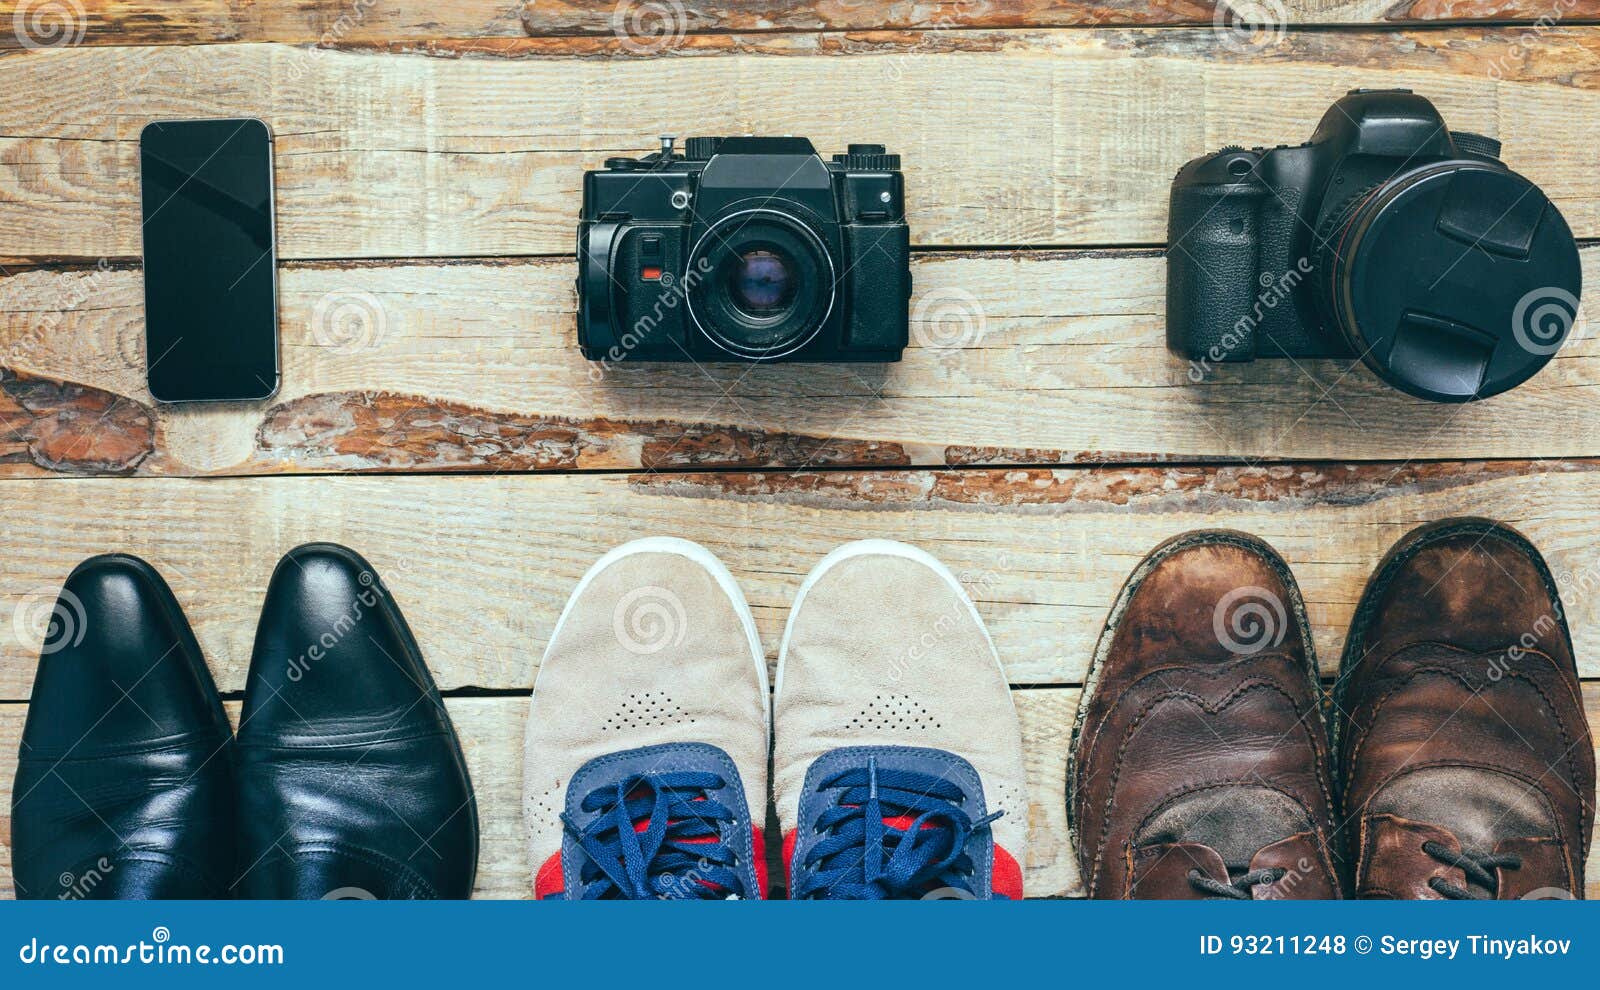 three pairs of shoes and three cameras. busines shoes, casual shoes, hiking boots on wooden backgriound concept of choosing right